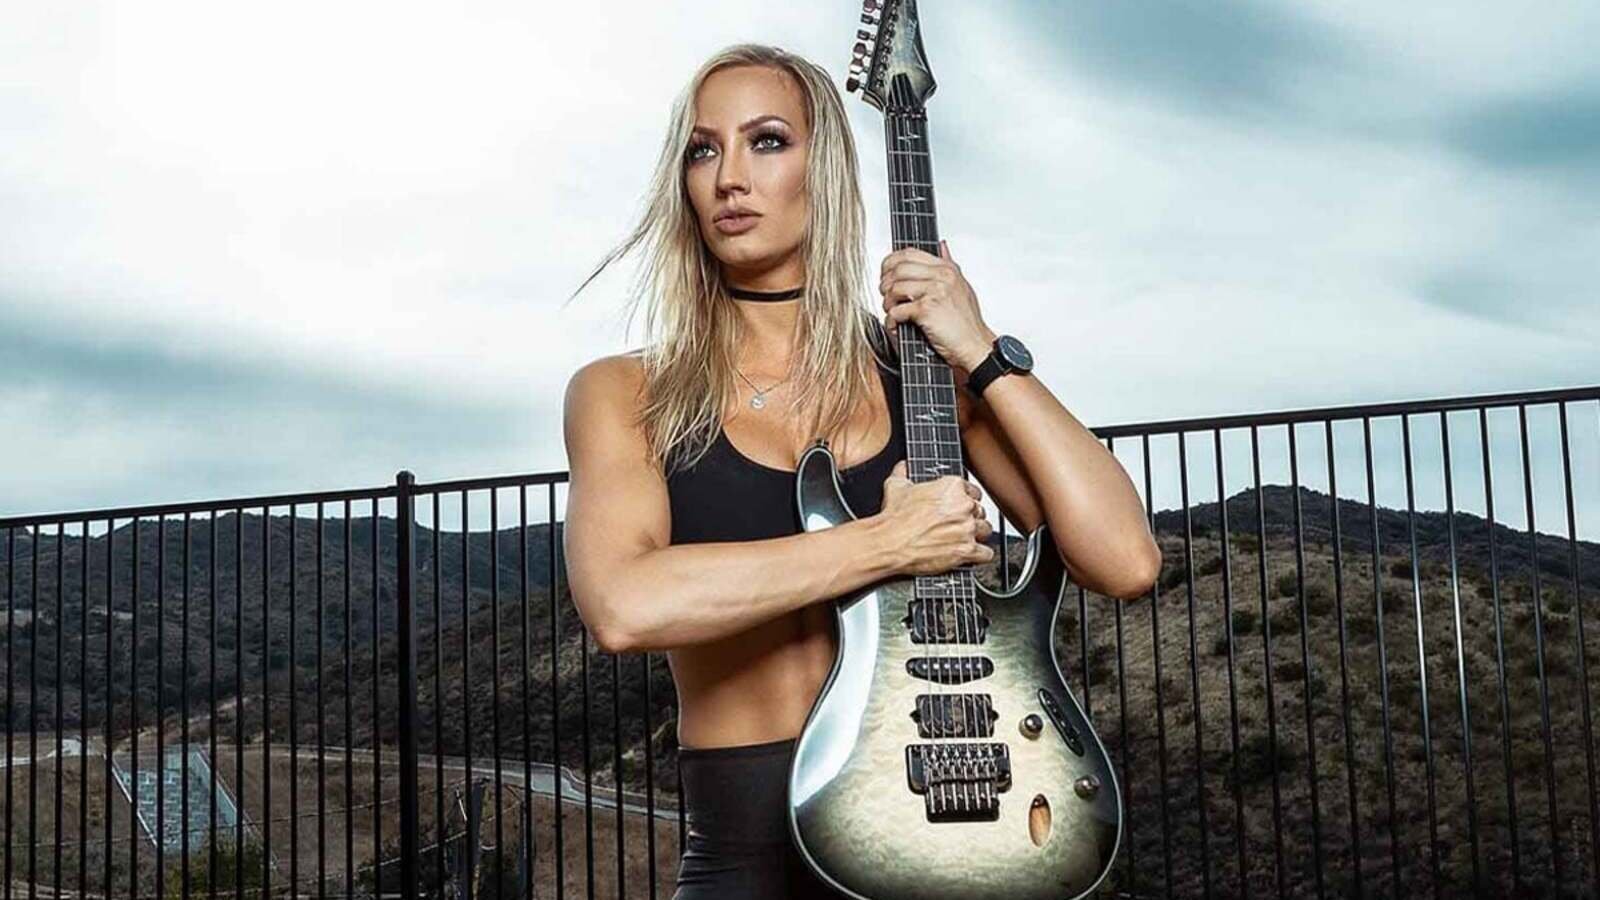 Nita Strauss Releases New Single "Winner Takes All" featuring Alice Cooper